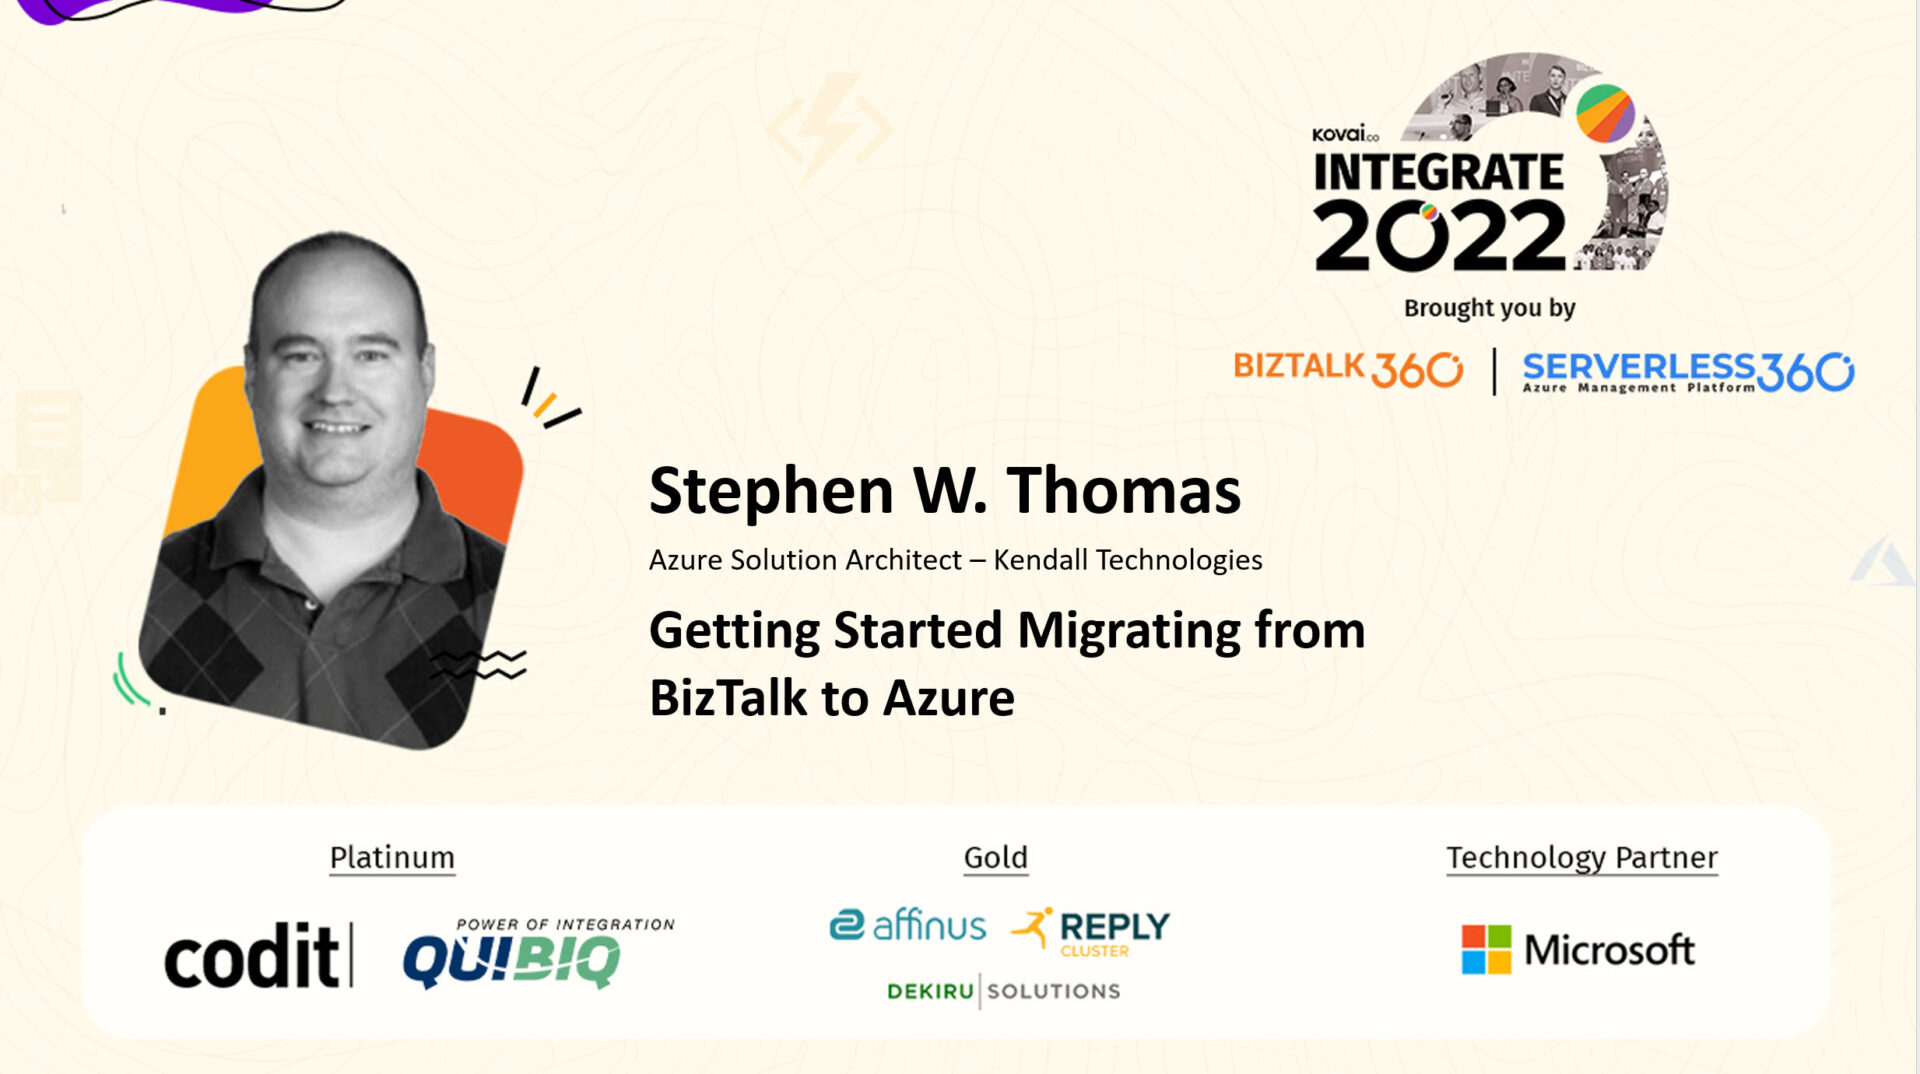 Getting Started Migrating from BizTalk to Azure